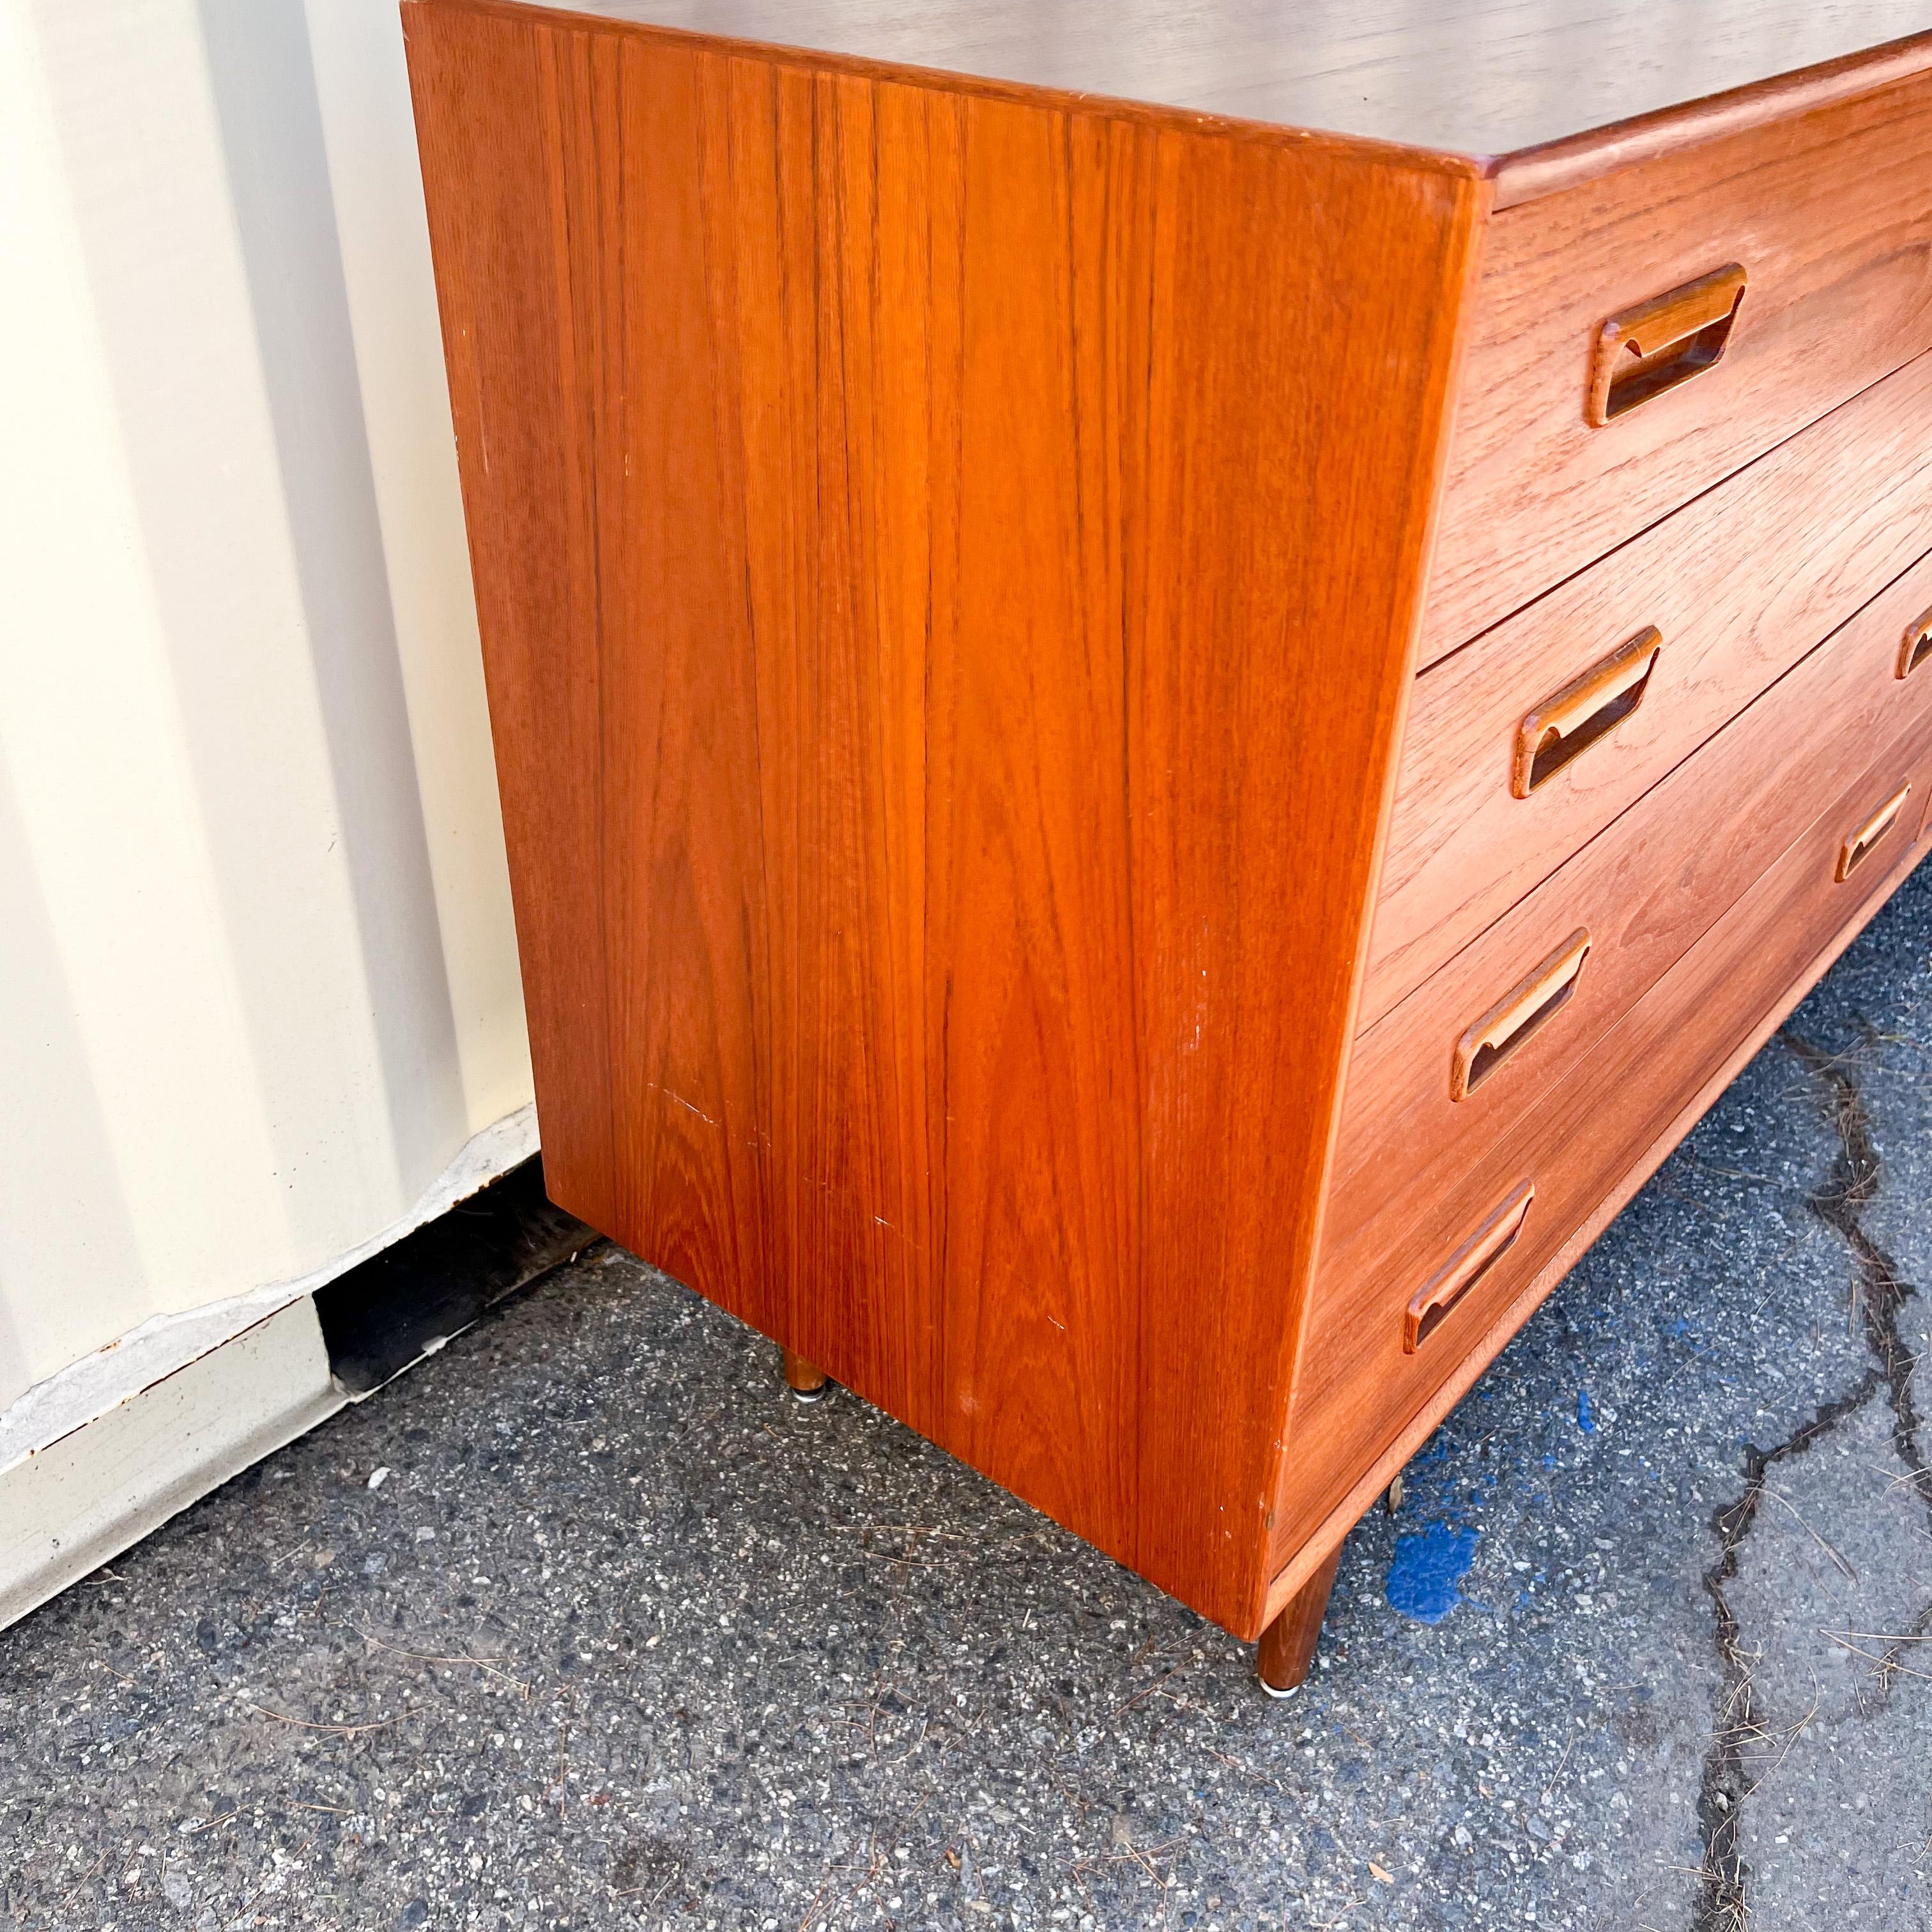 Mid-Century Modern danish teak eight drawer dresser. Some scuffing and scratching to the teak finish.